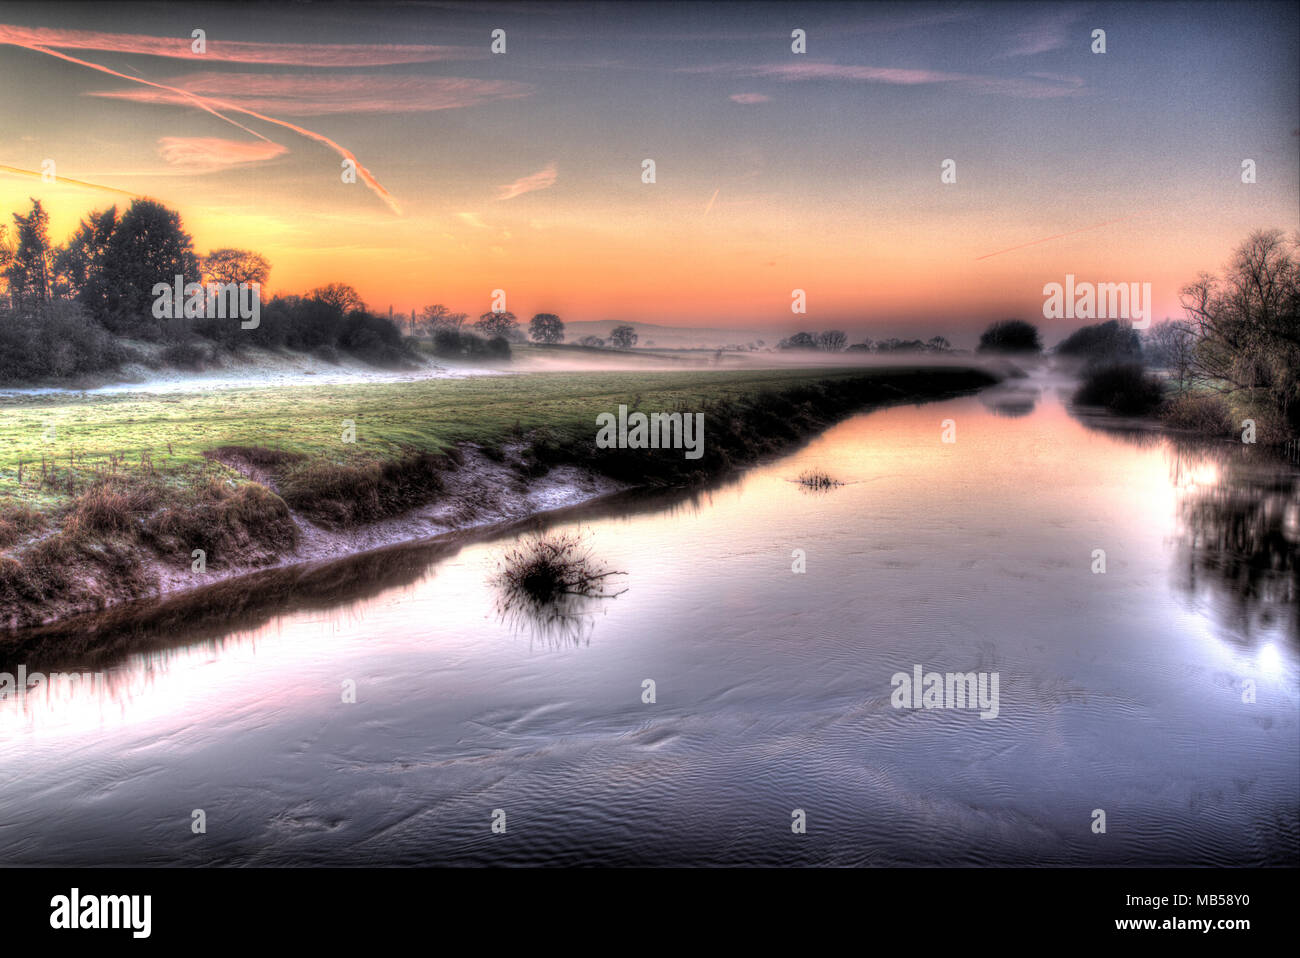 River Dee, England Wales border. Picturesque misty sunset view of the River Dee. Stock Photo